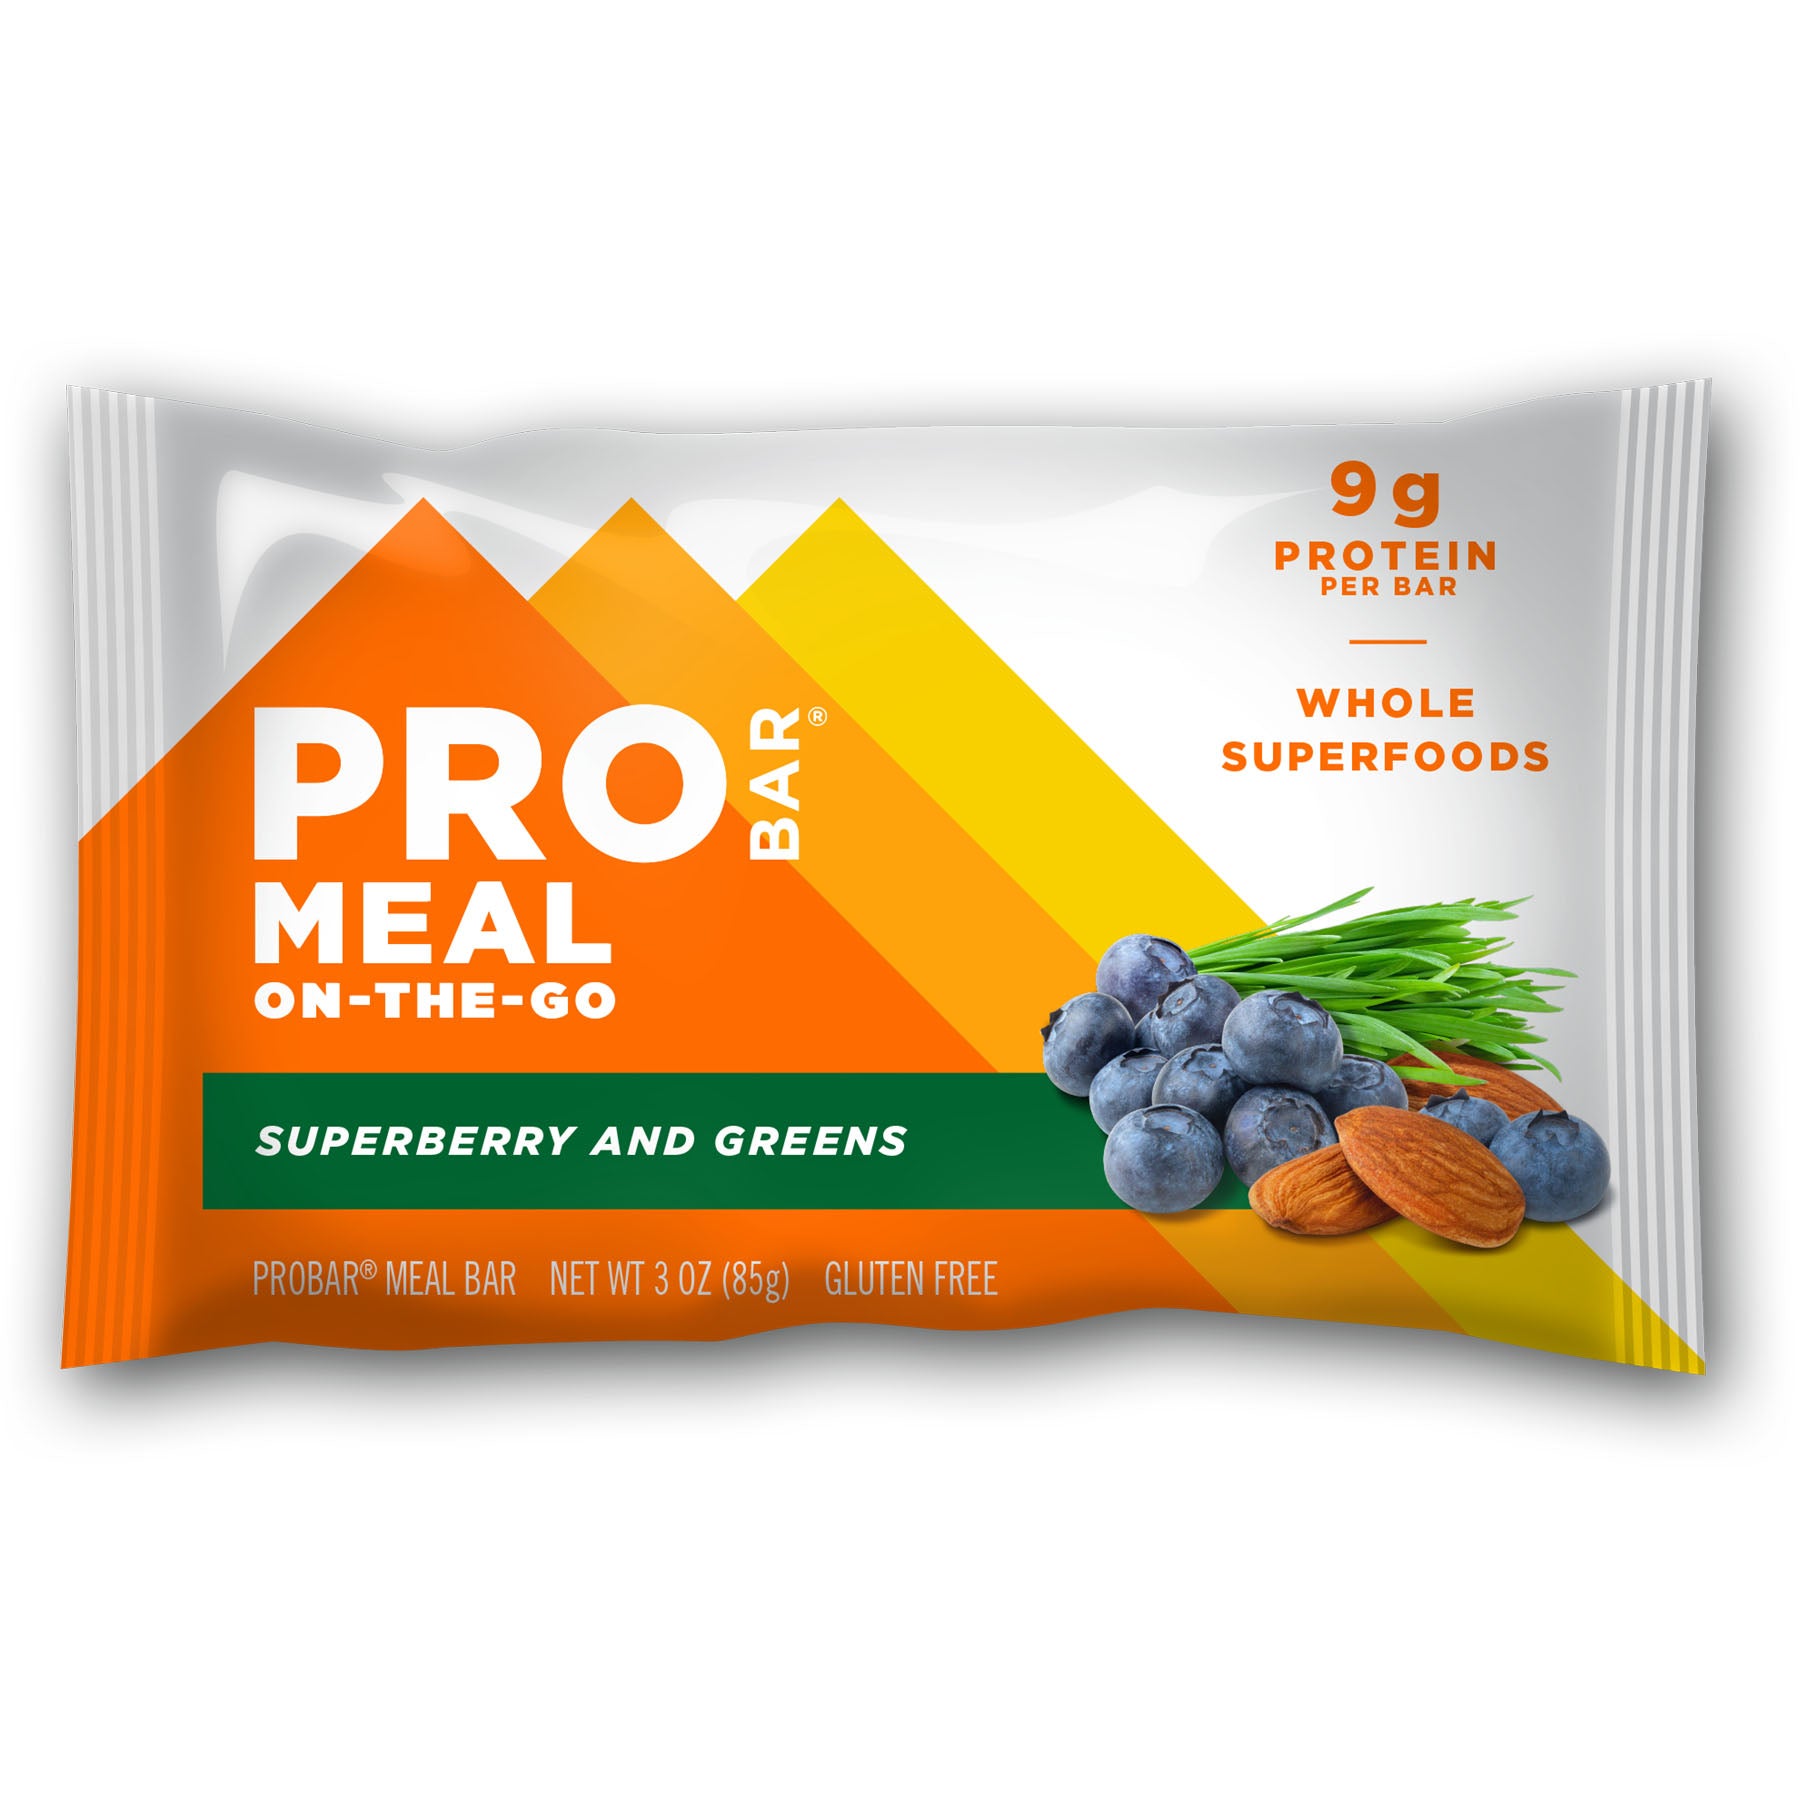 The front of the superberry and greens package